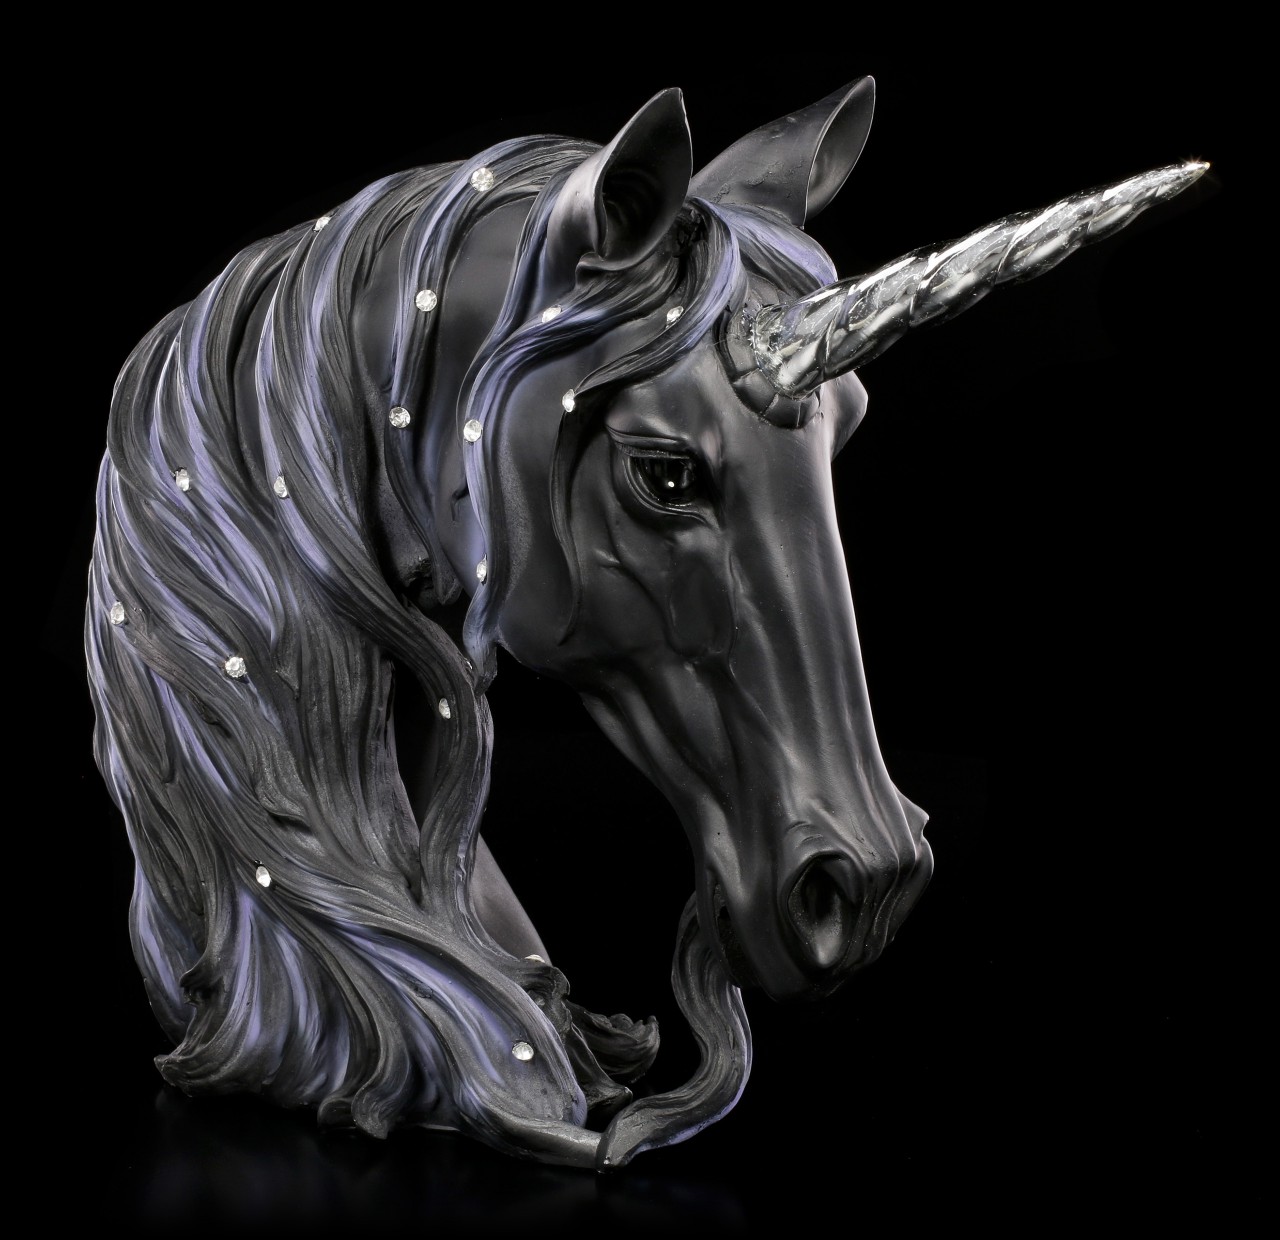 Bust of a Unicorn - Jewelled Midnight - large